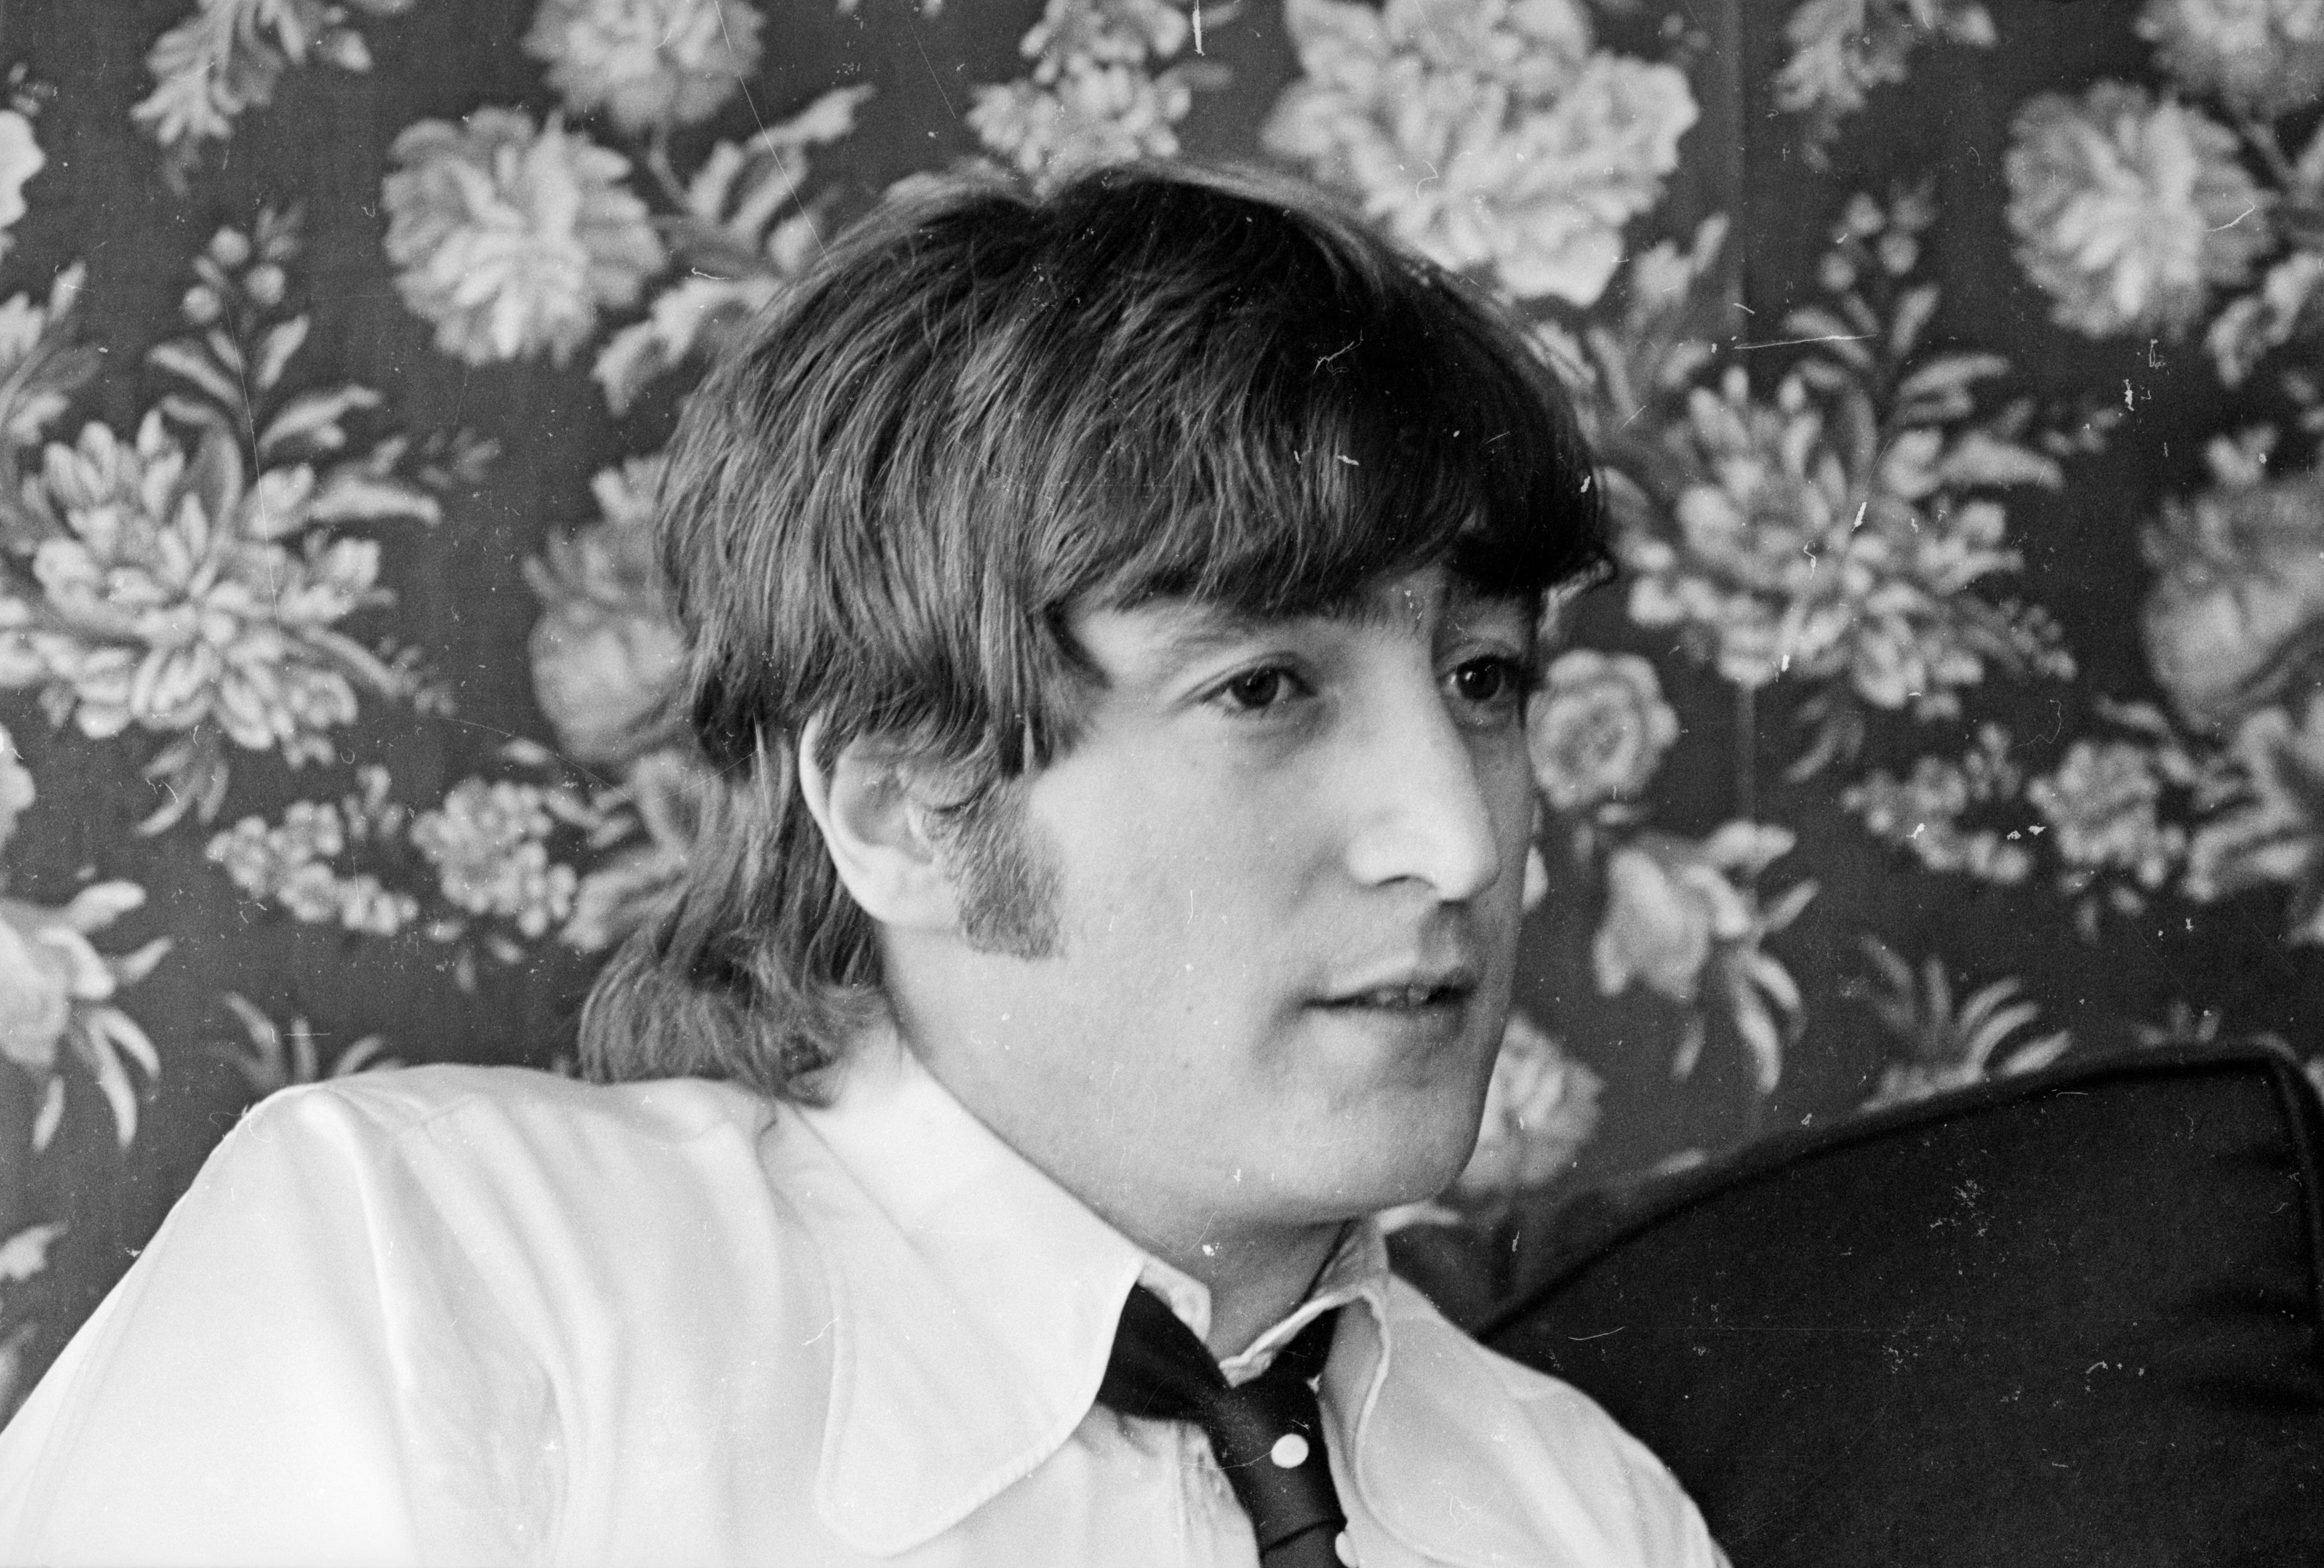 John Lennon in front of floral wallpaper during an era when he wrote many classic rock songs